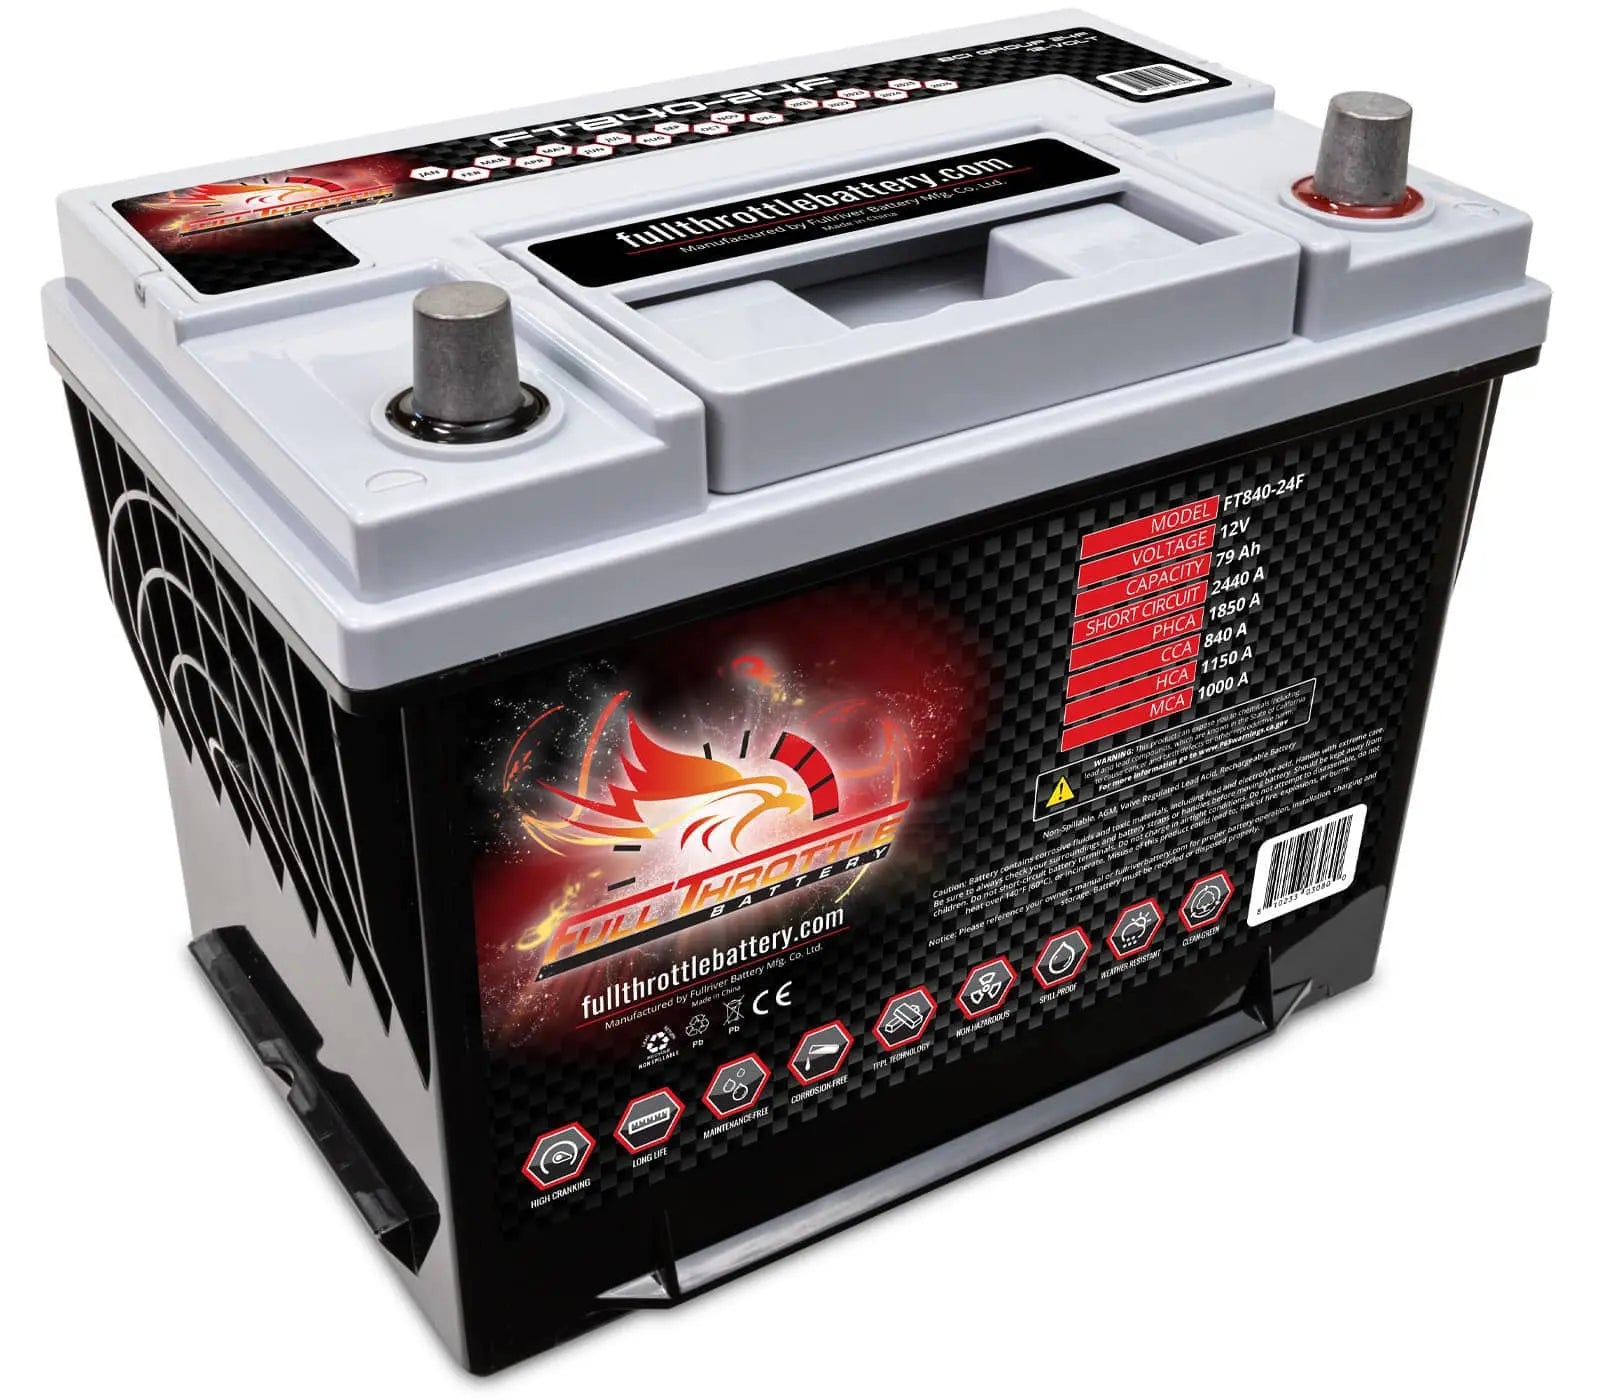 FT840-24F Group 24F High-Performance AGM Battery